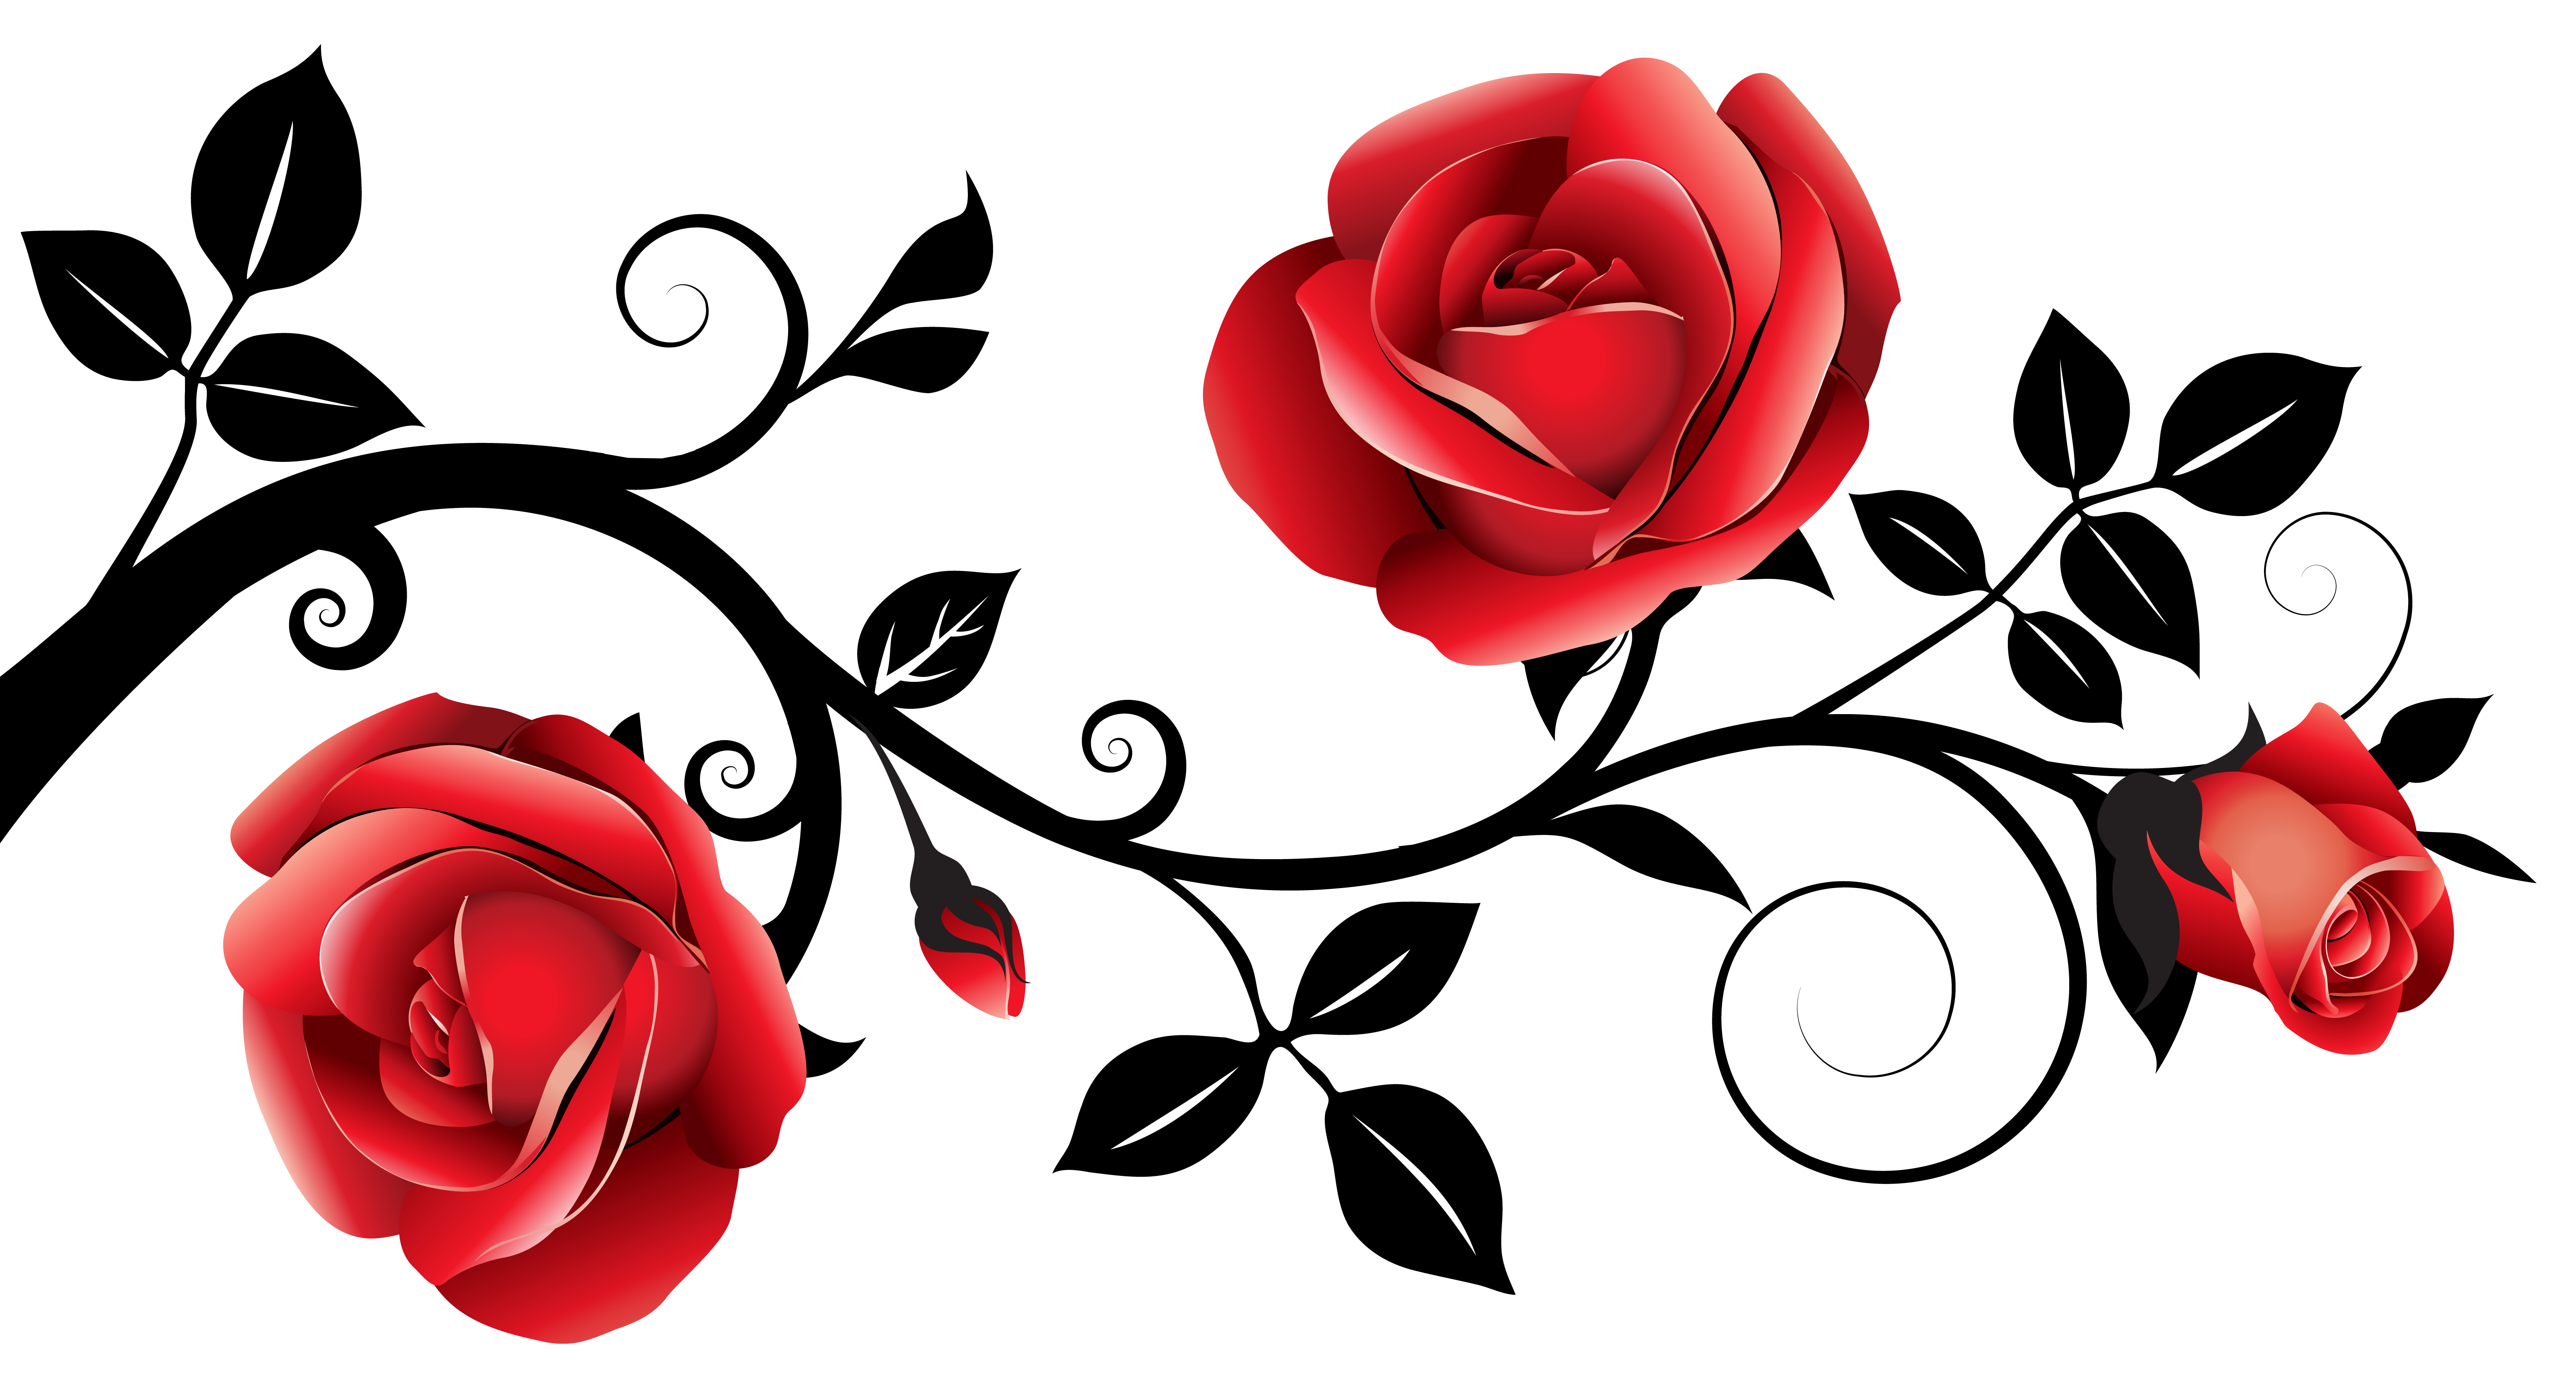 Clipart skull rose. Red and black decorative